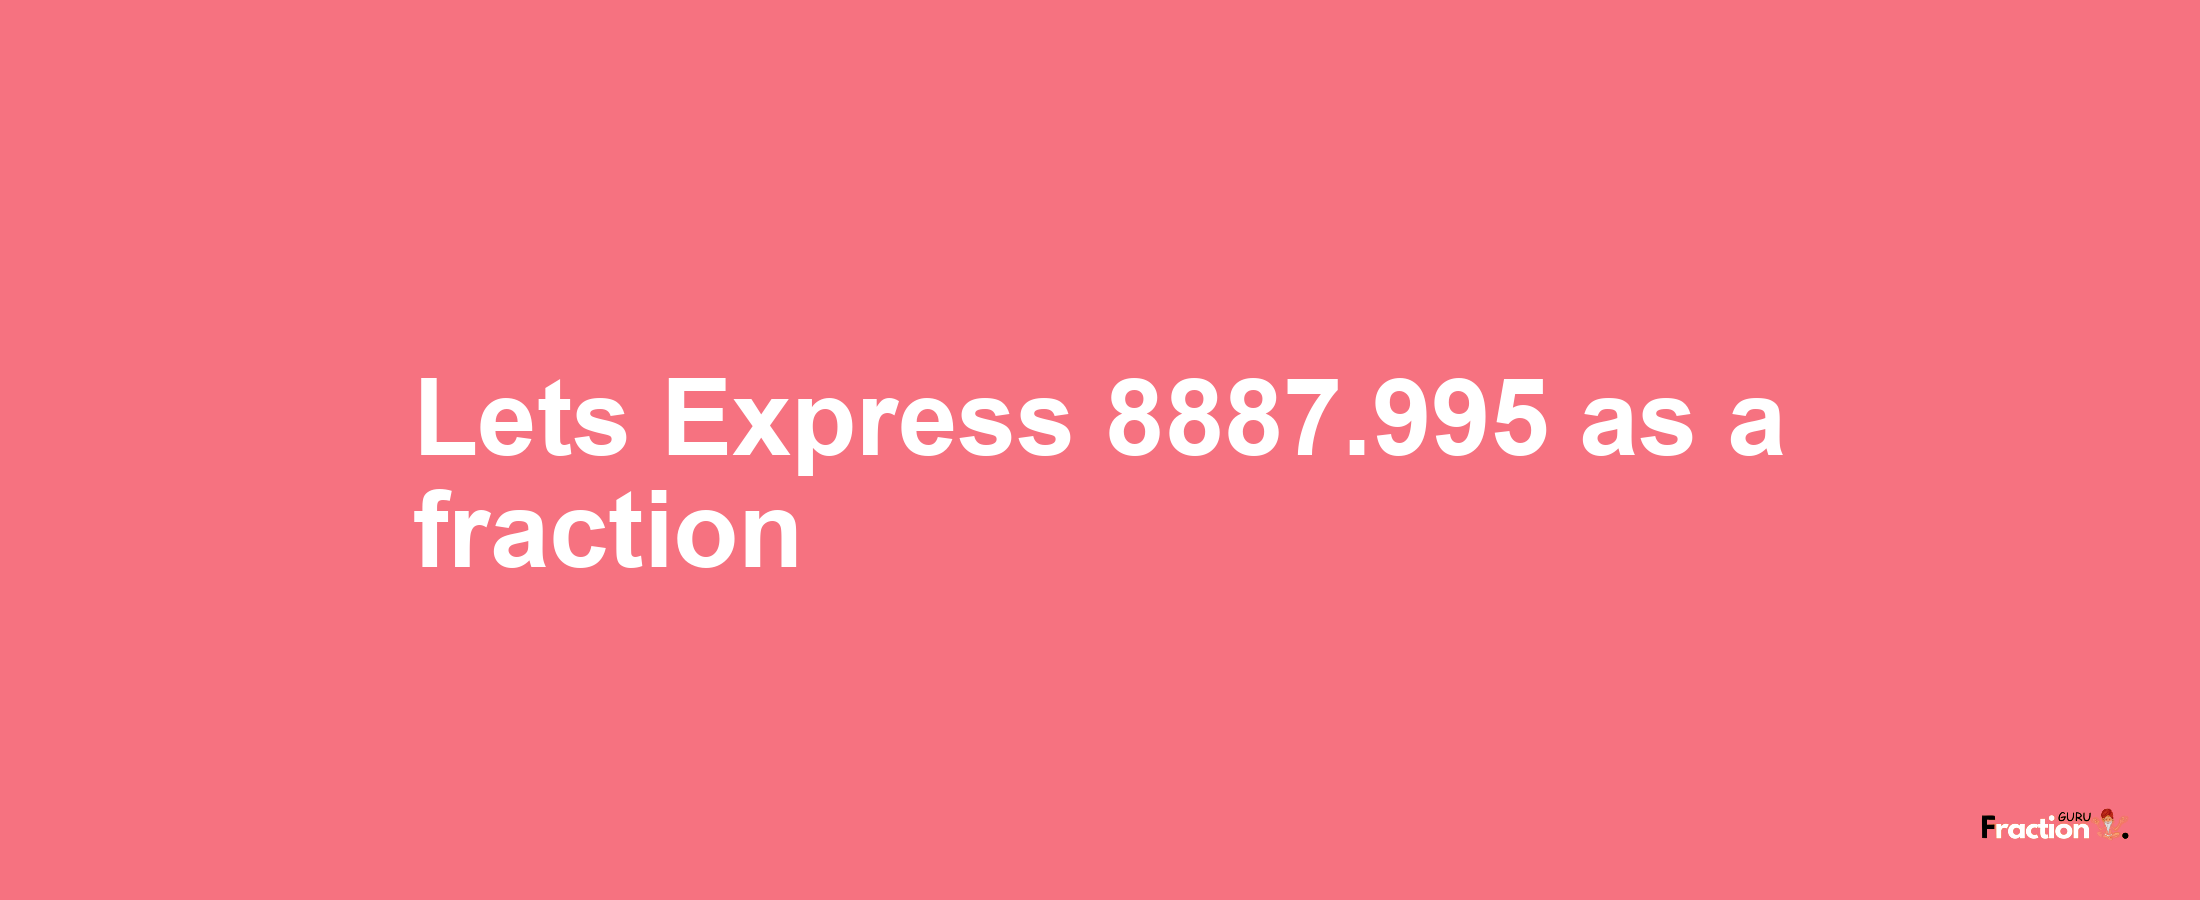 Lets Express 8887.995 as afraction